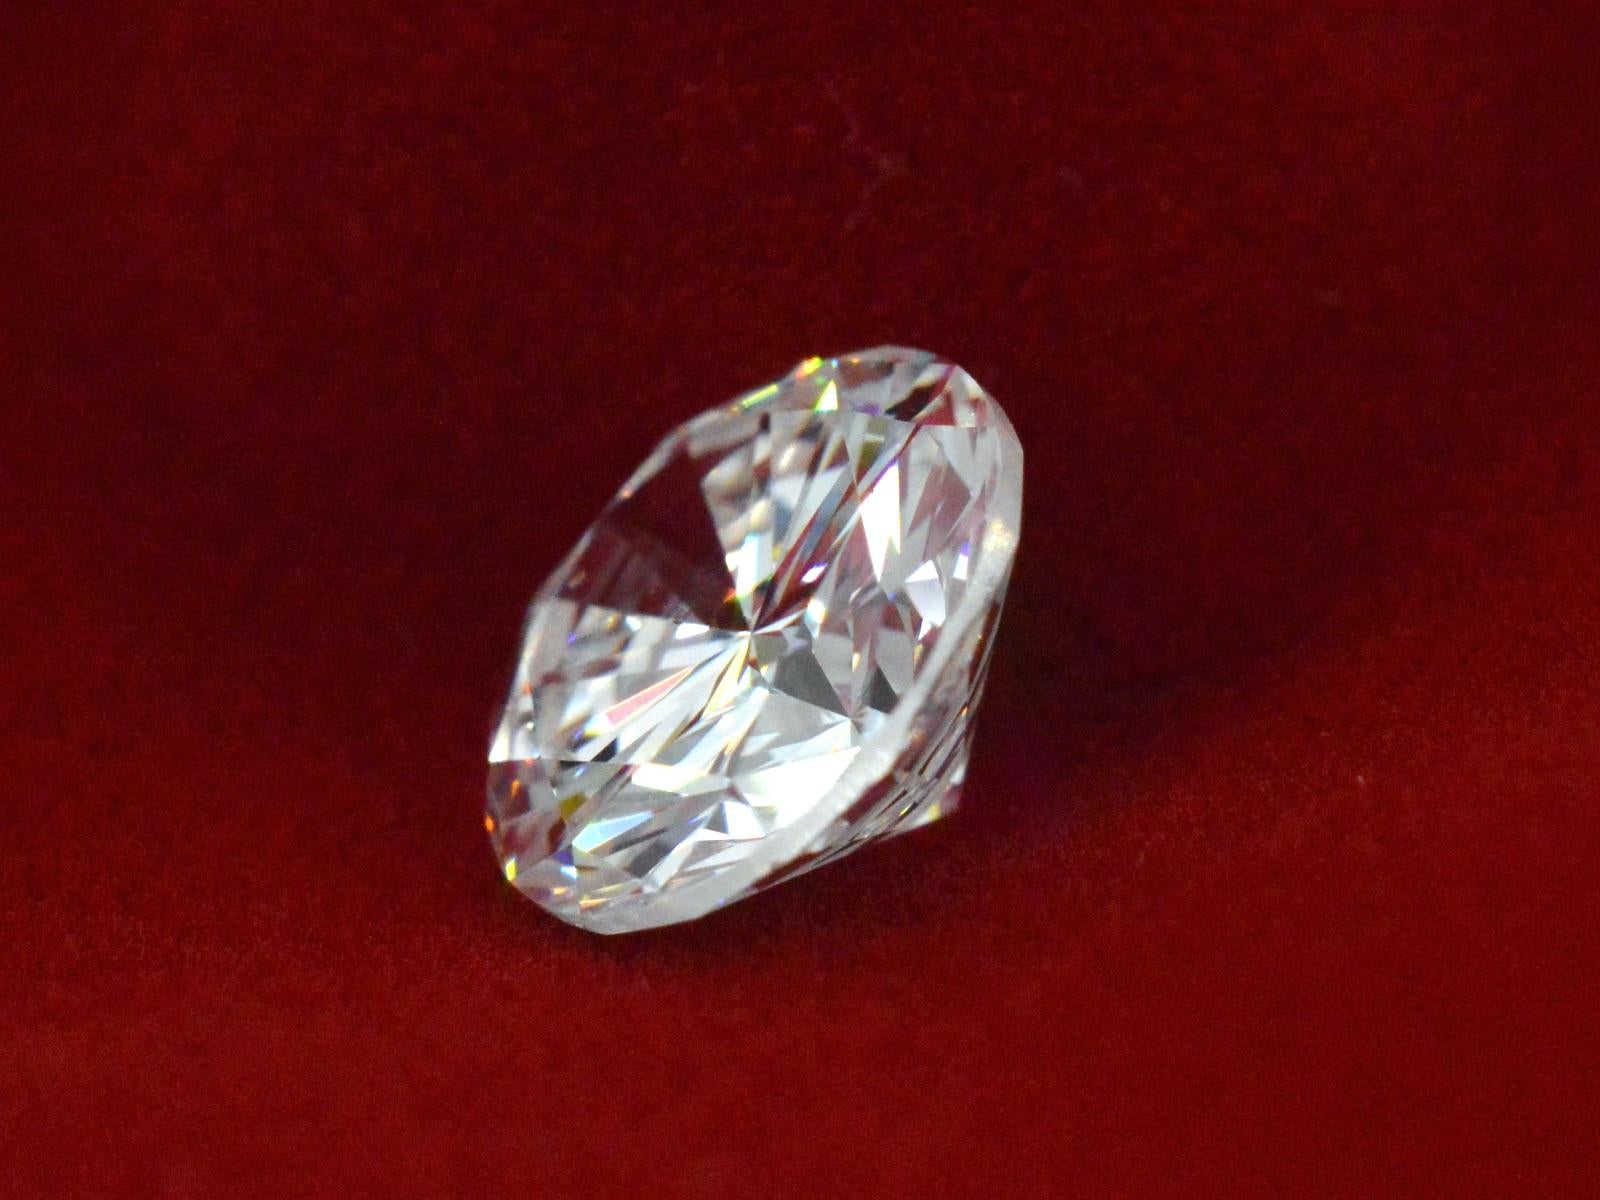 Quantity: 1
 Product Name: 1.09 Carat Natural Starcut Diamond
 Brand: Starcut
 Cut shape: Brilliant cut modified
 Weight: 1.09 carats
 Color: G
 Purity: SI2
 Packaging: IGI sealed
 Certificate number: 553245606
 Condition: New
Retail value: €17.500,-